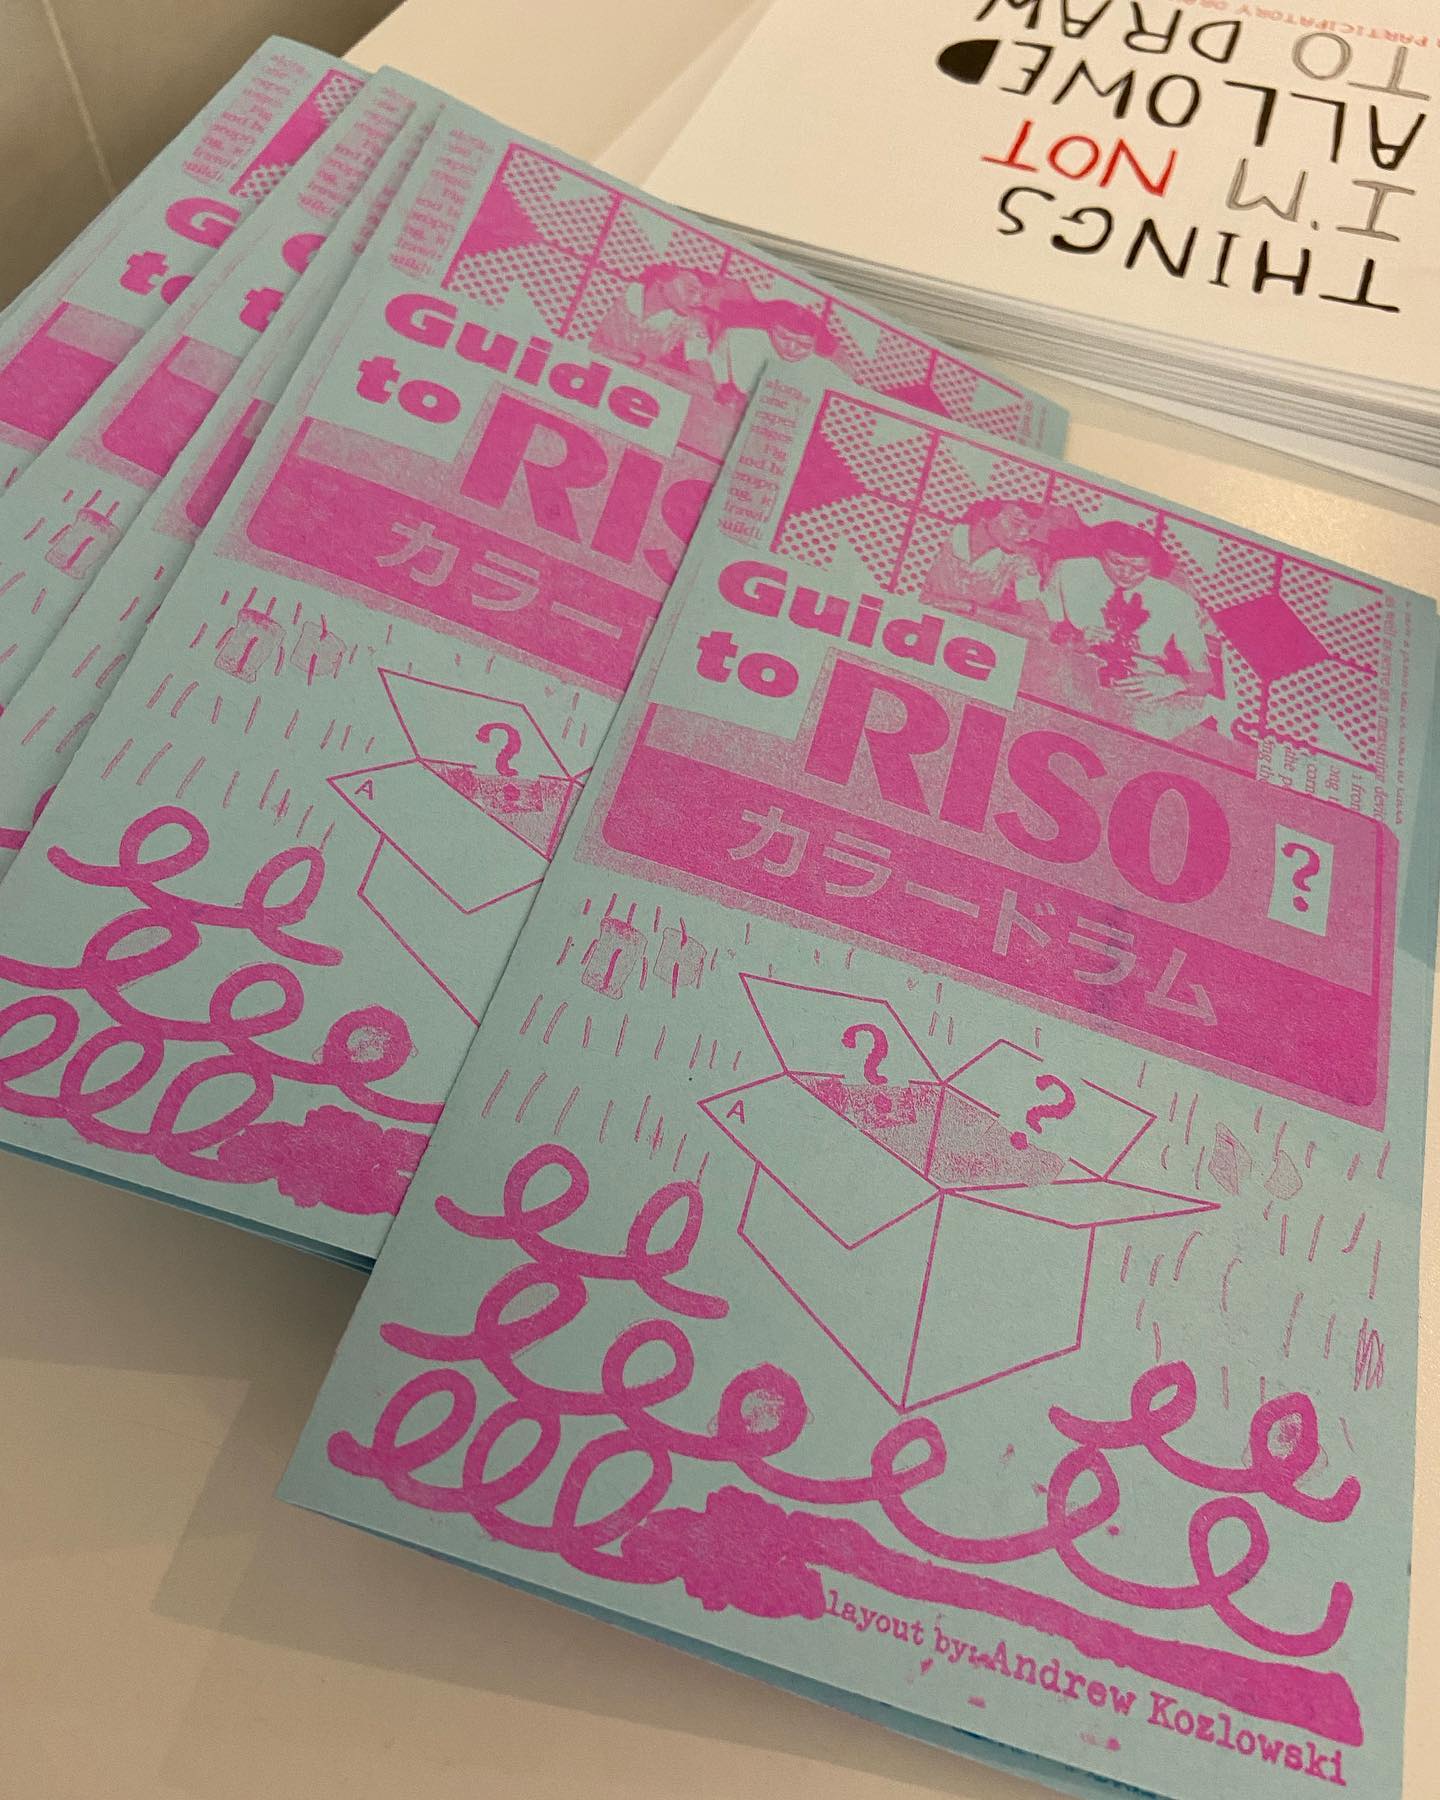 A booklet explaining riso printing